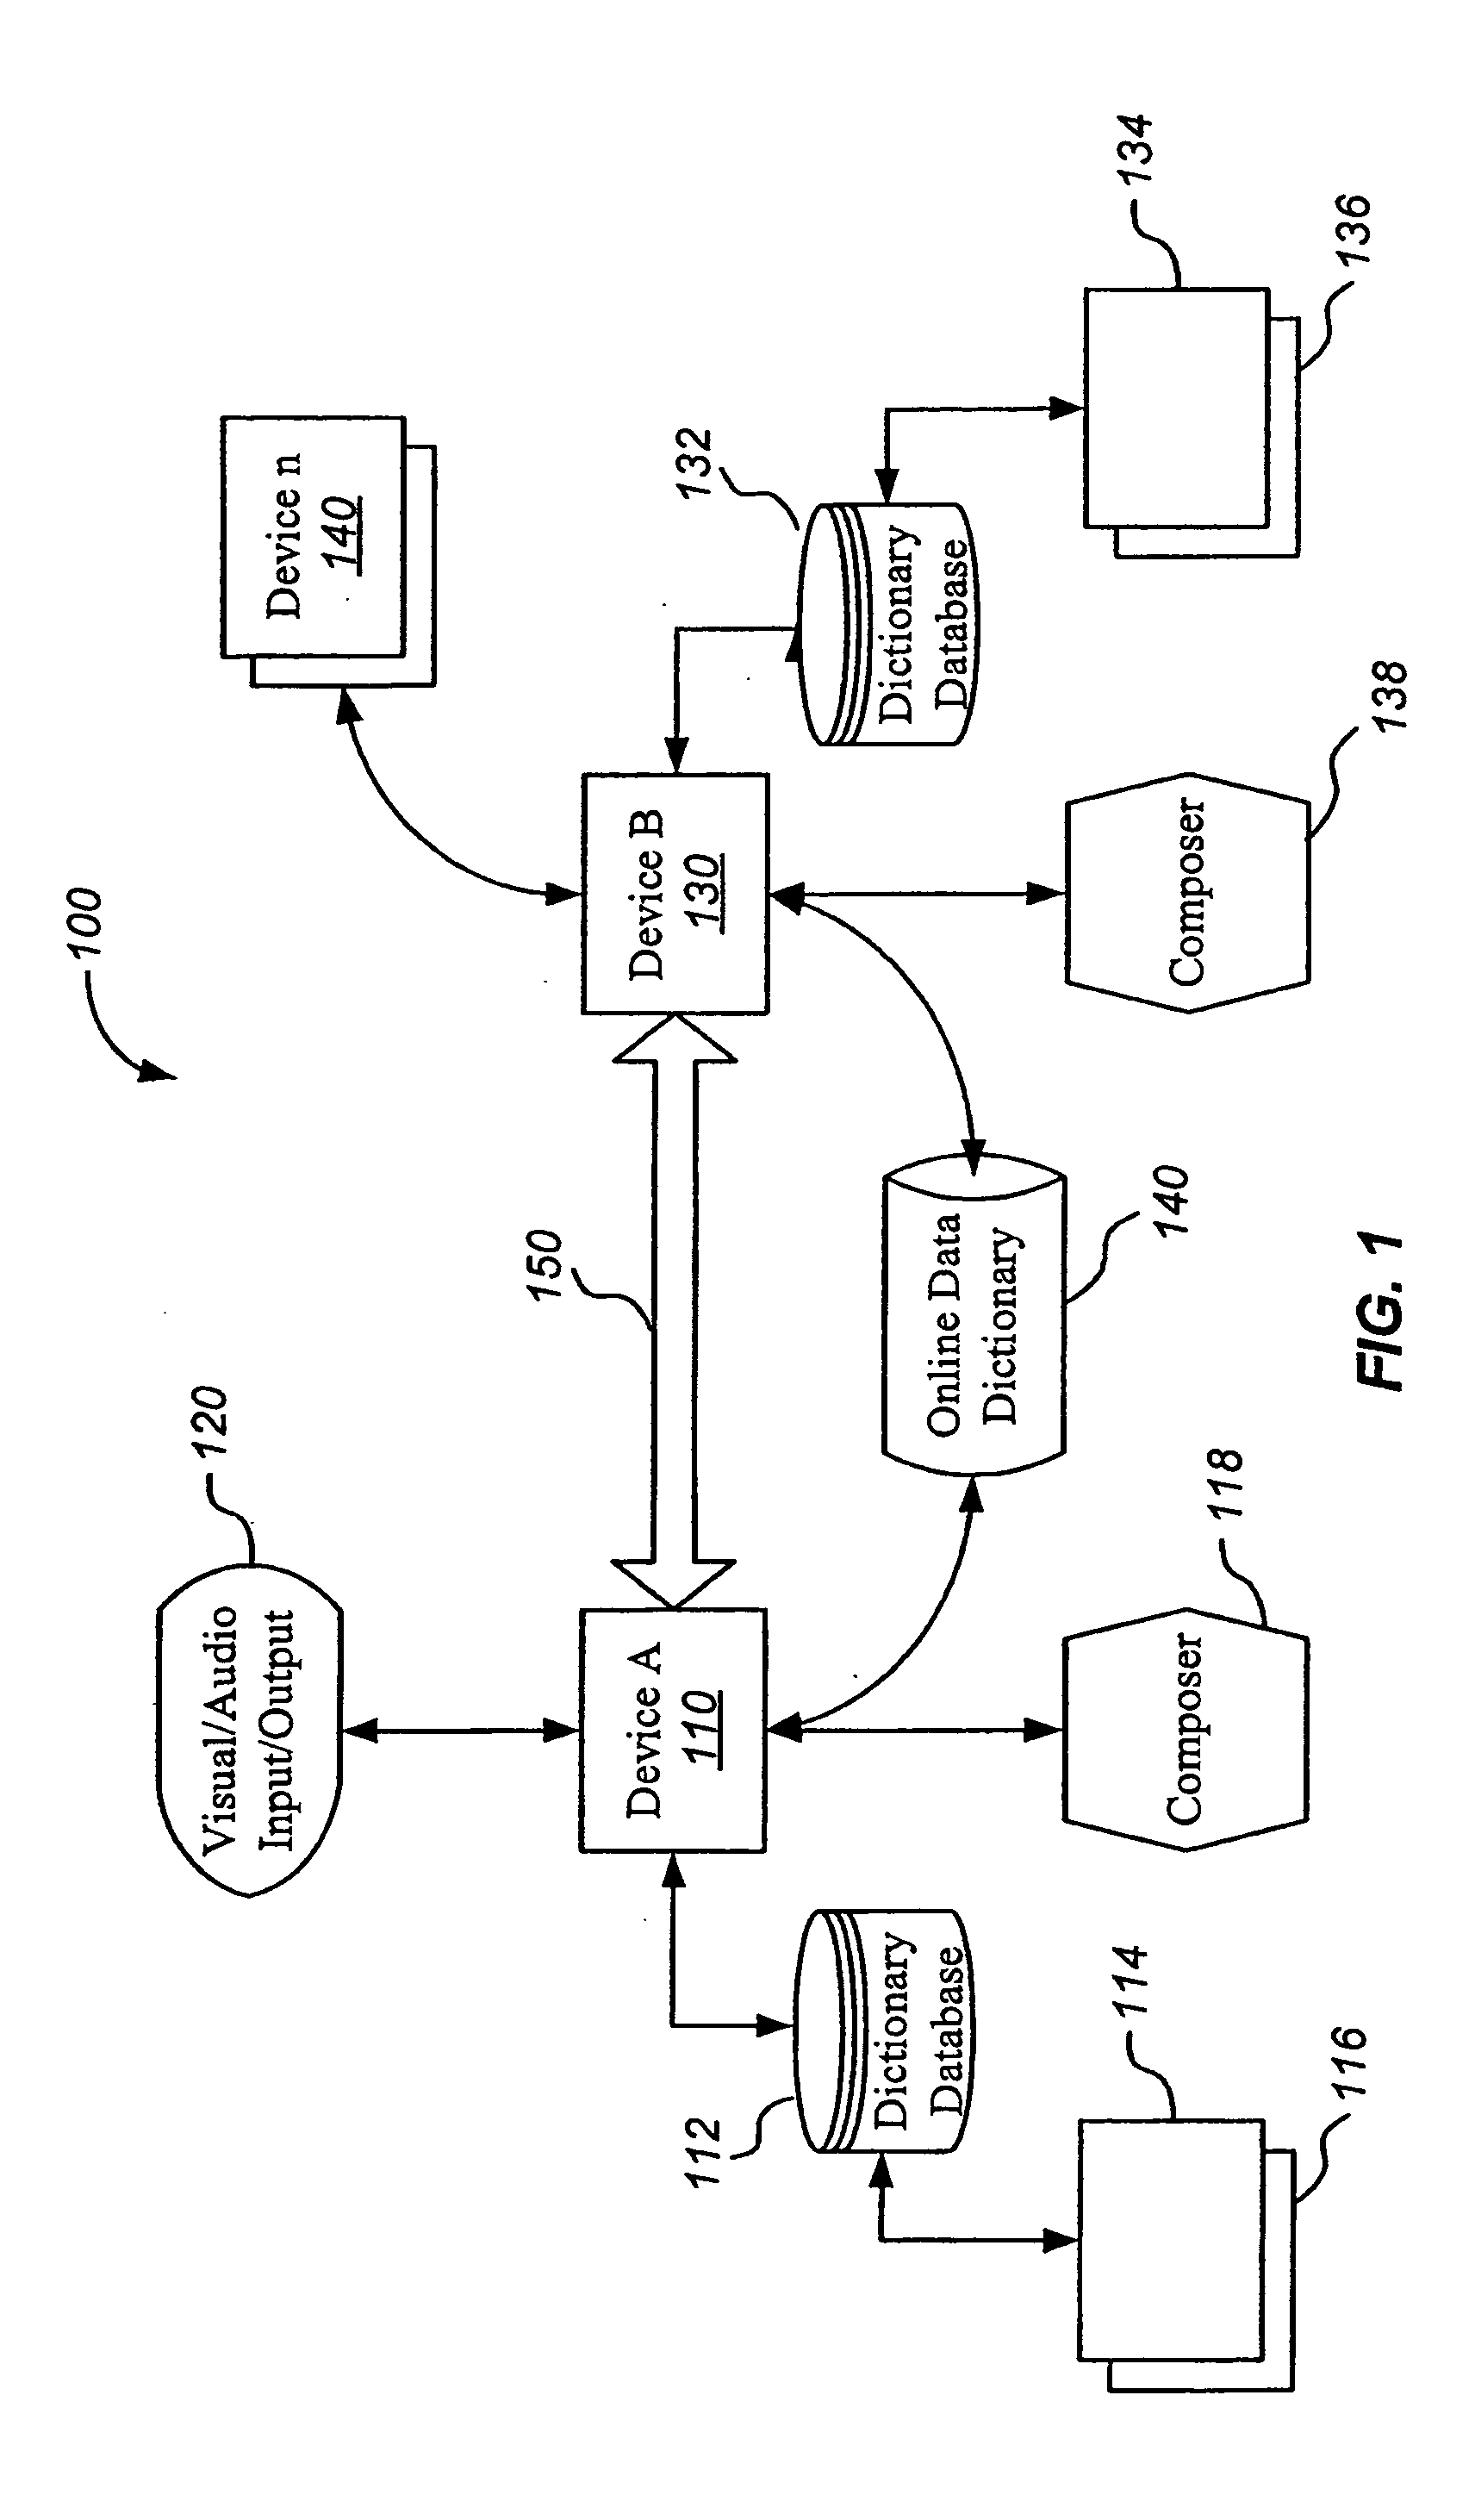 Method for encoding messages between two devices for transmission over standard online payment networks